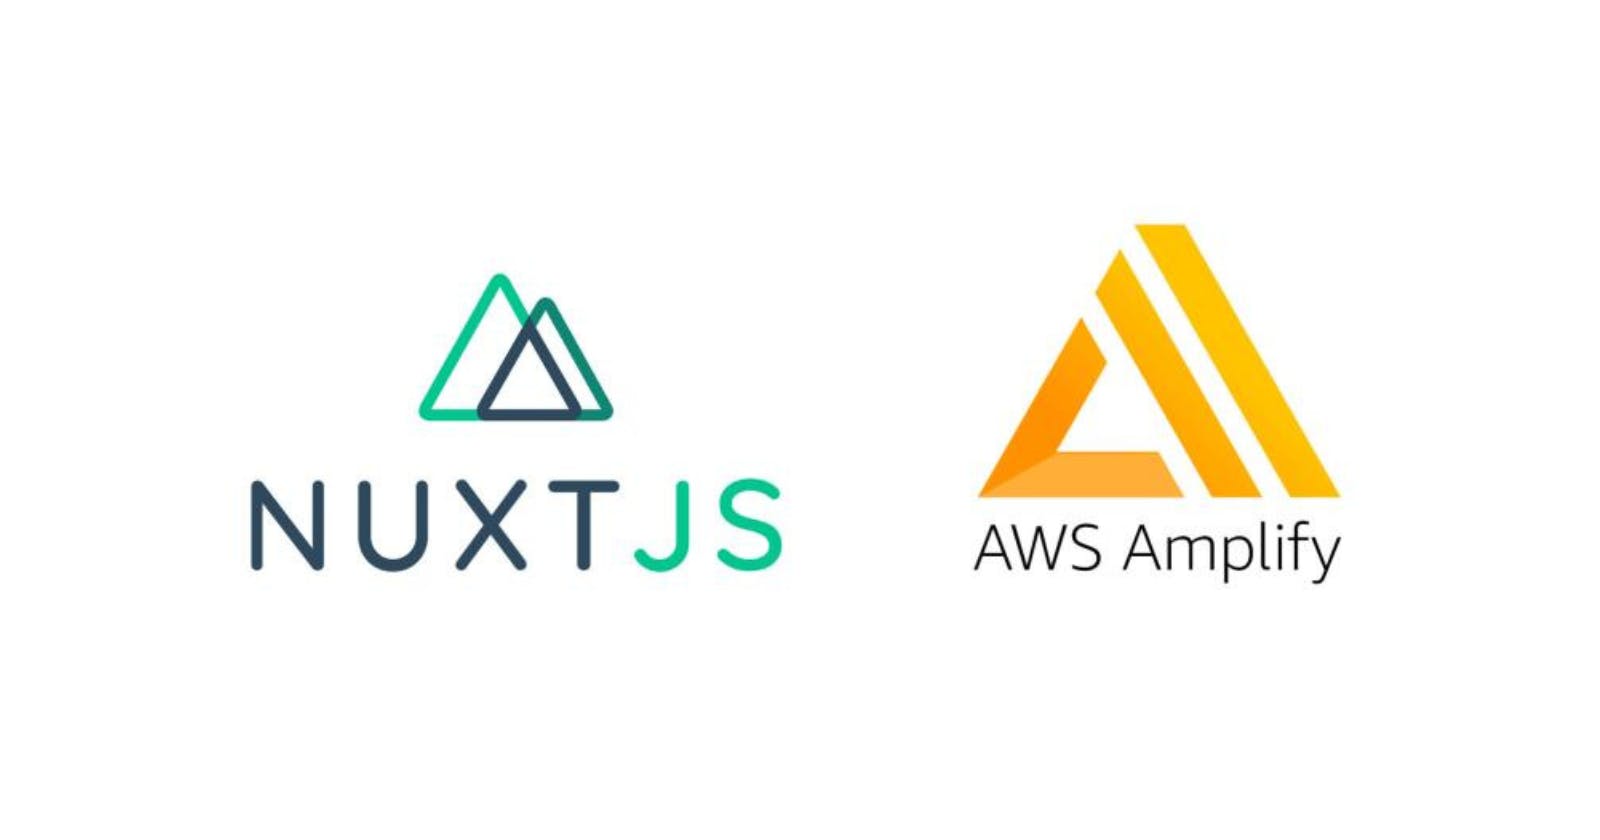 AWS-Amplify Integration with NUXT 3.0